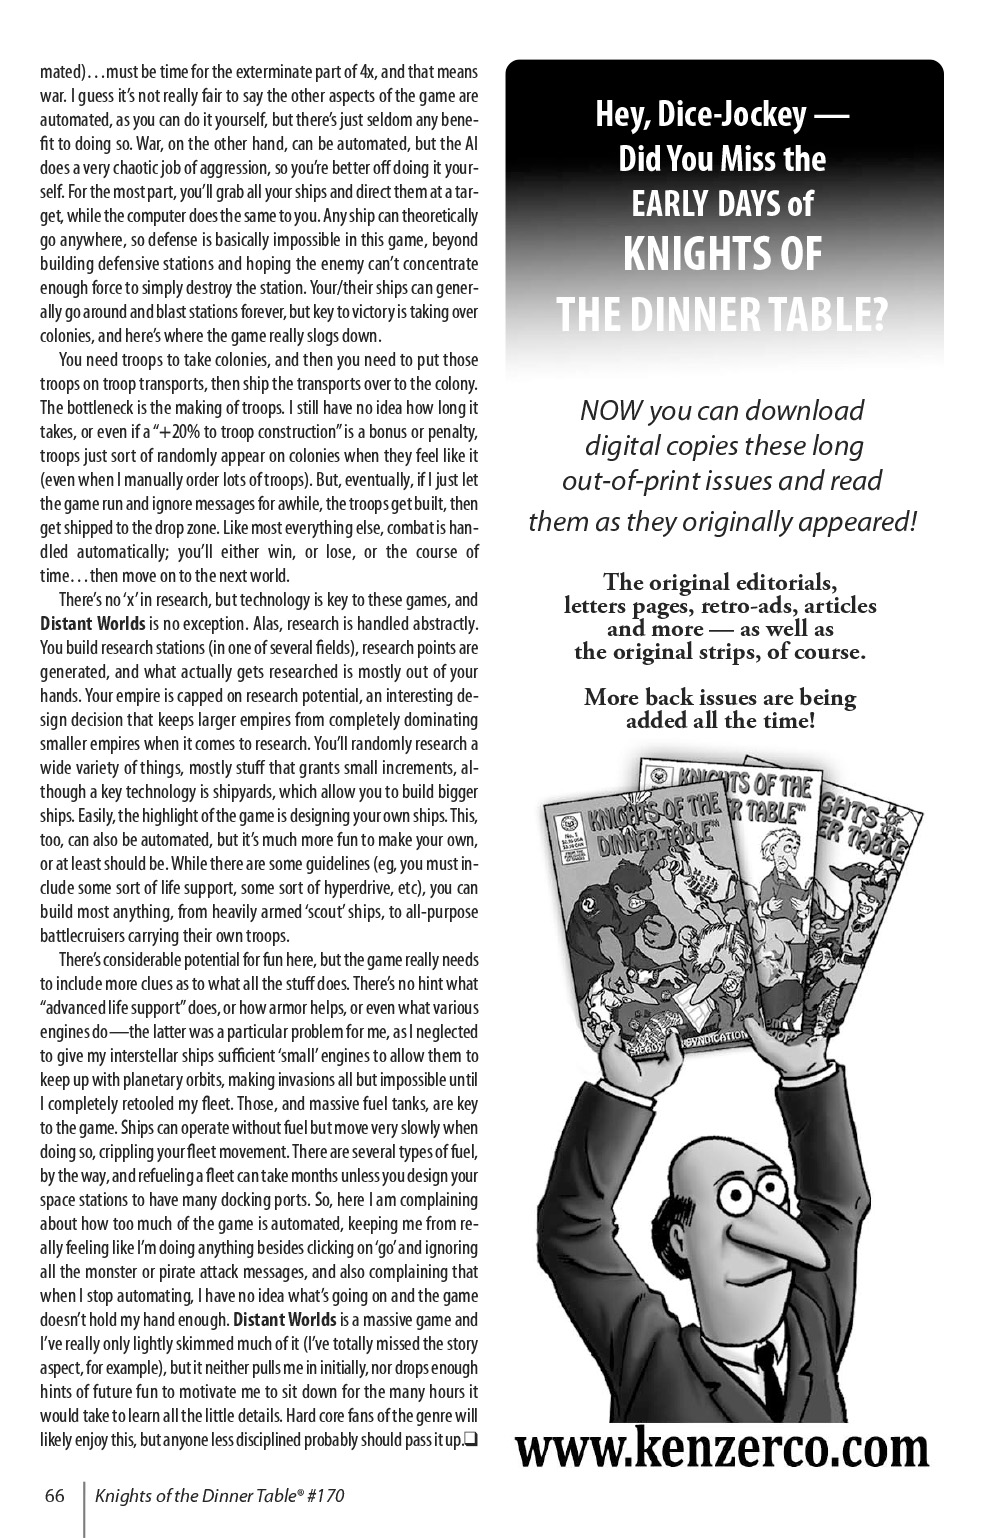 Read online Knights of the Dinner Table comic -  Issue #170 - 68